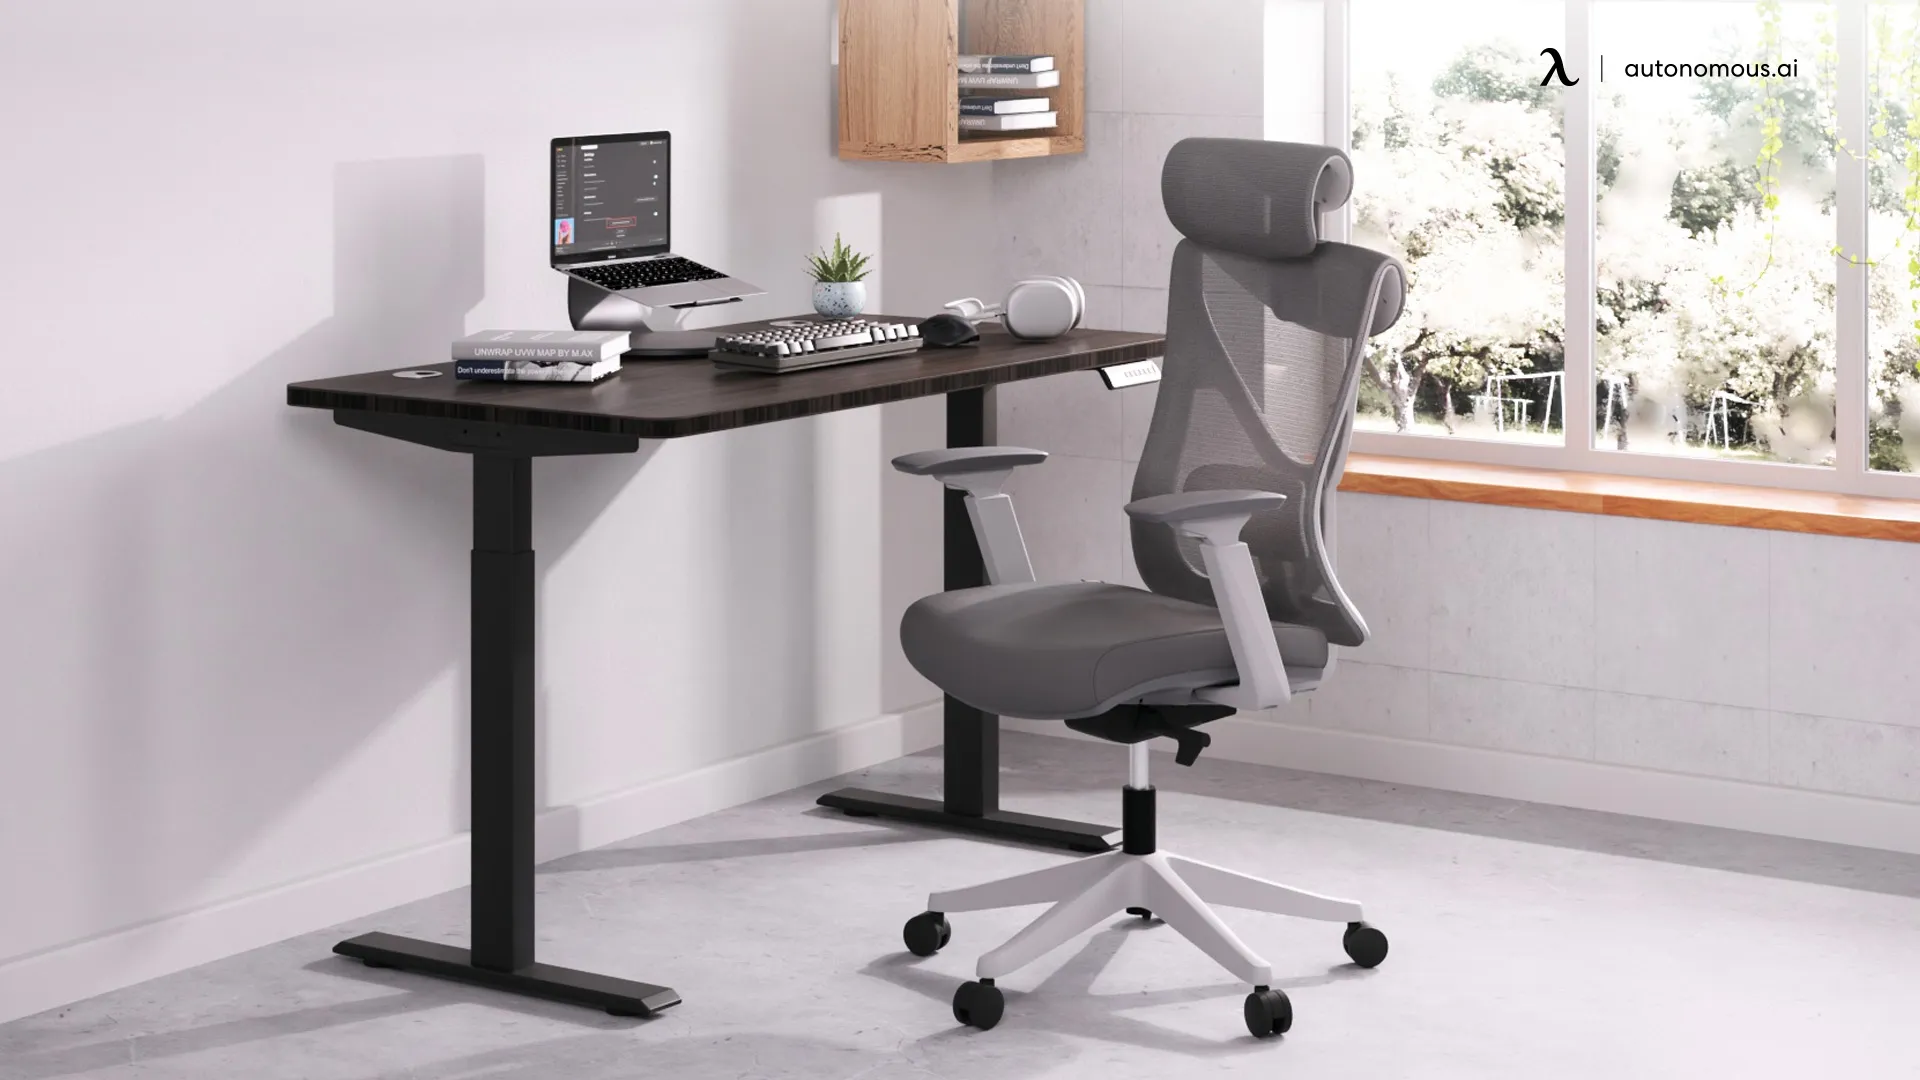 Plush Fabric Office Chair Buyer's Guide: Comfort and Elegance